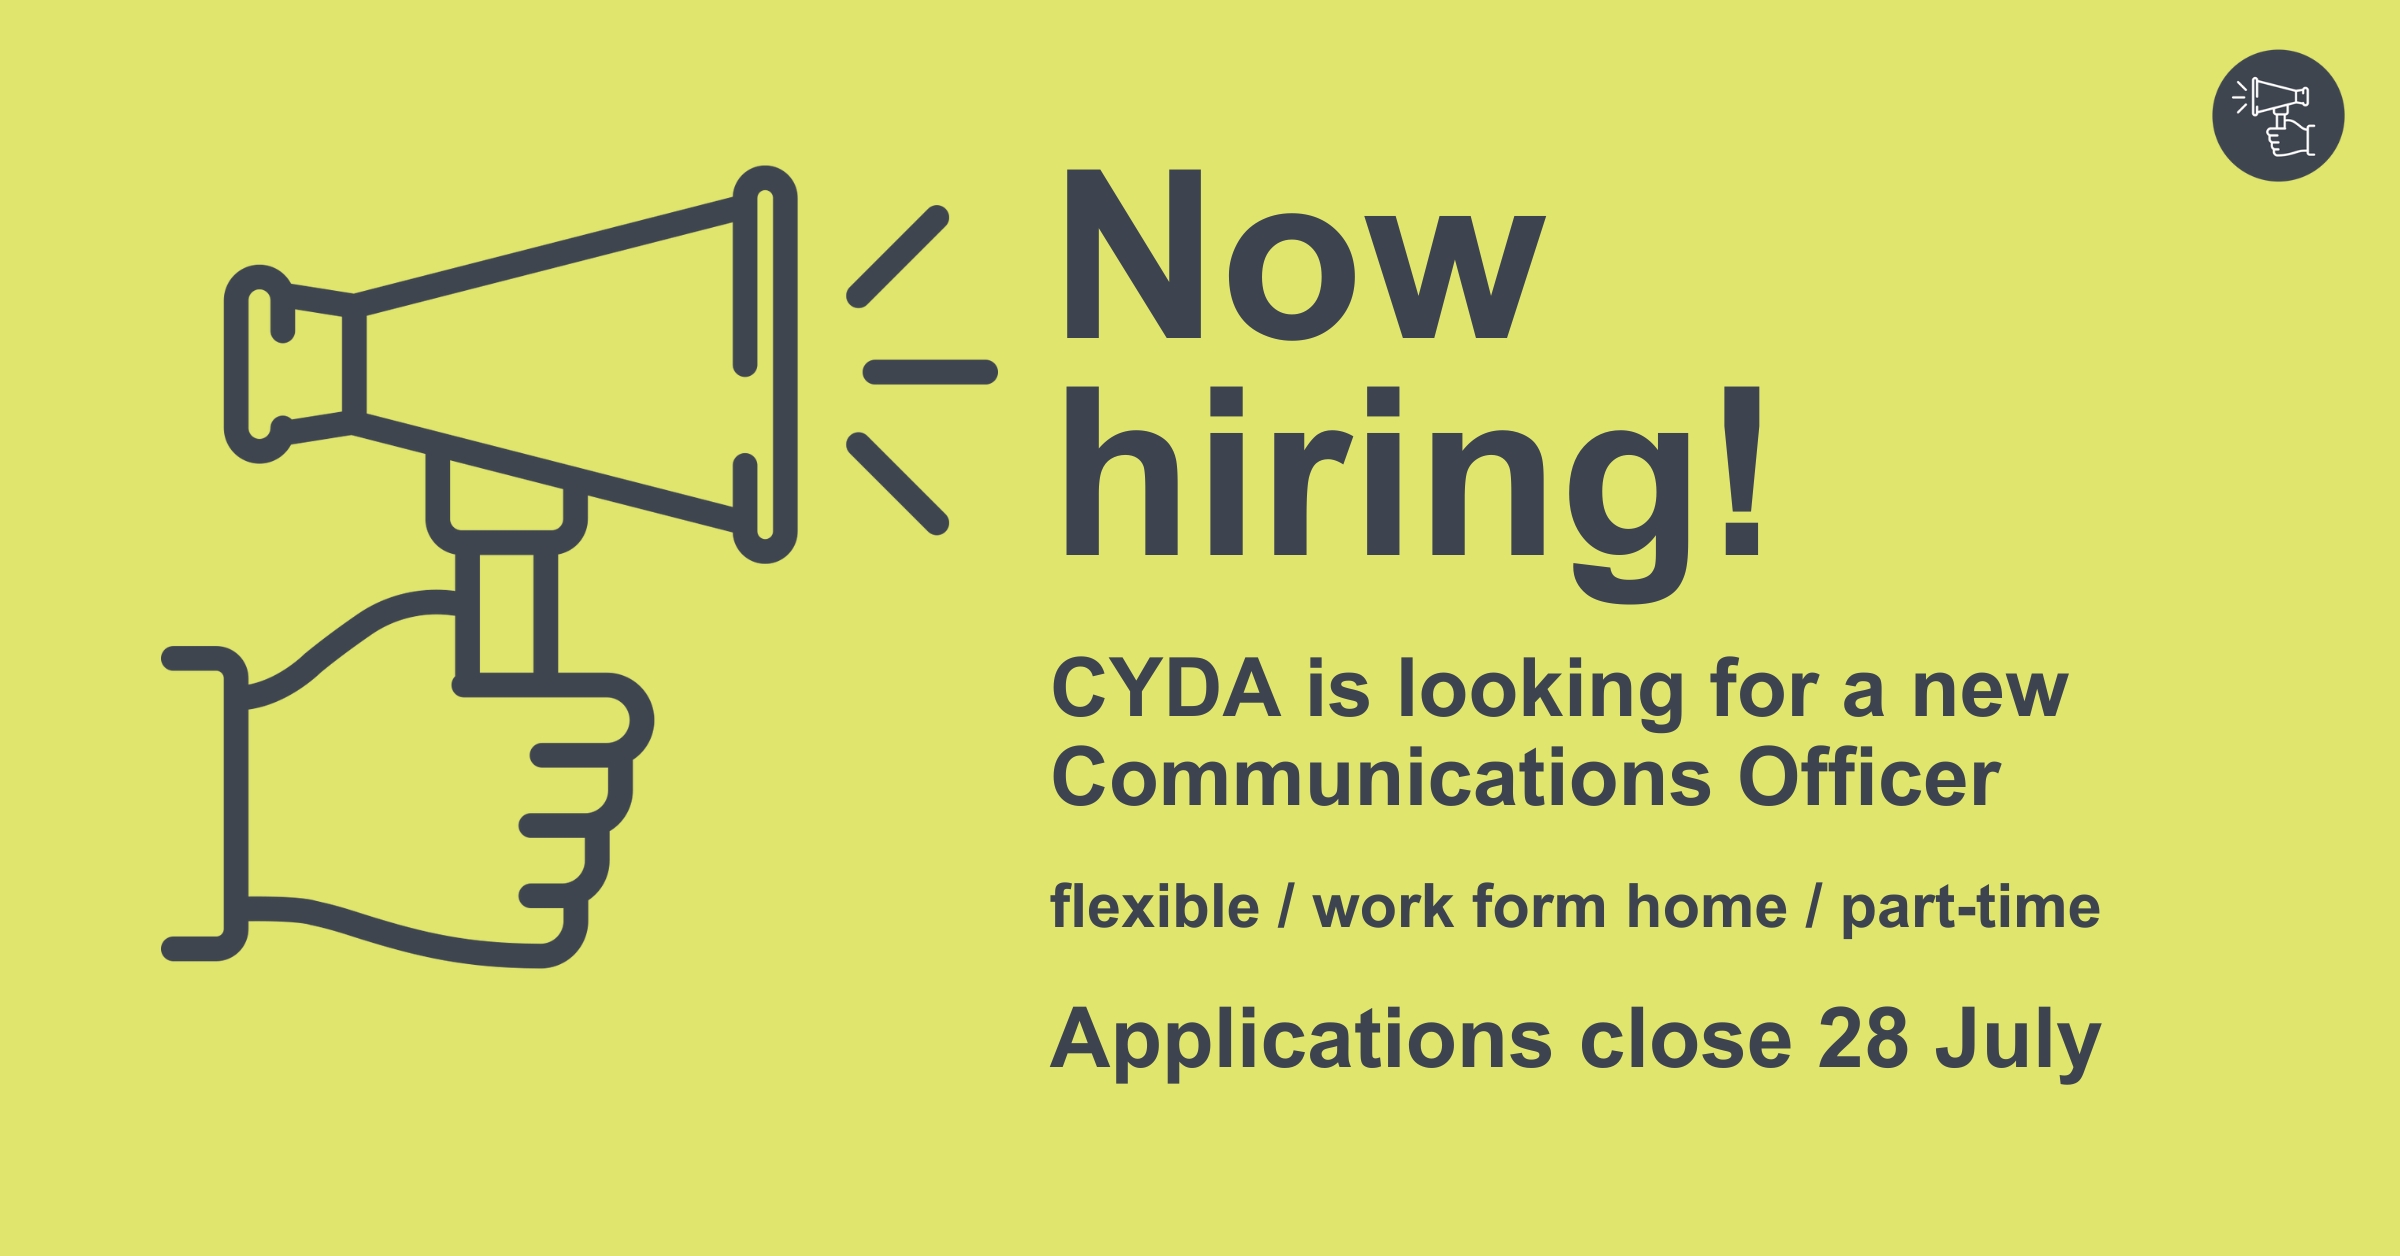 A megaphone on a green background with text reading "Now hiring! CYDA is looking for a new Communications Officer. flexible/work from home/part-time. Applications close 28 July".